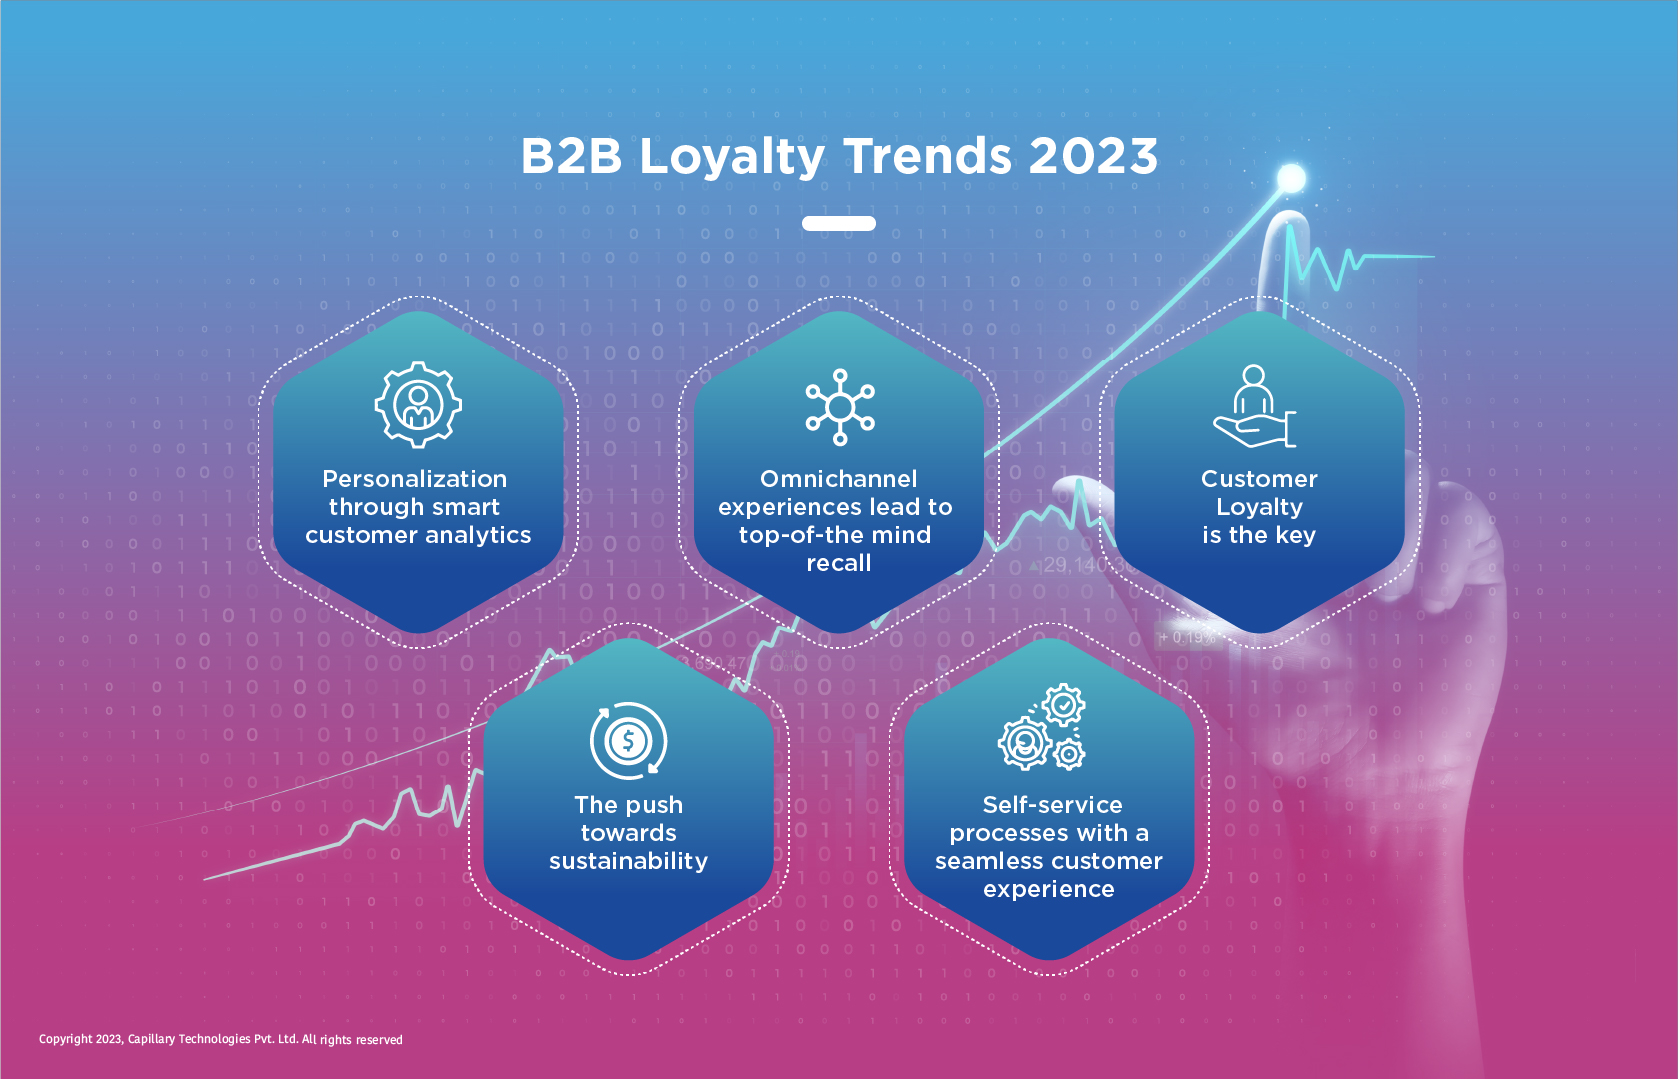 5 trends with B2B Loyalty